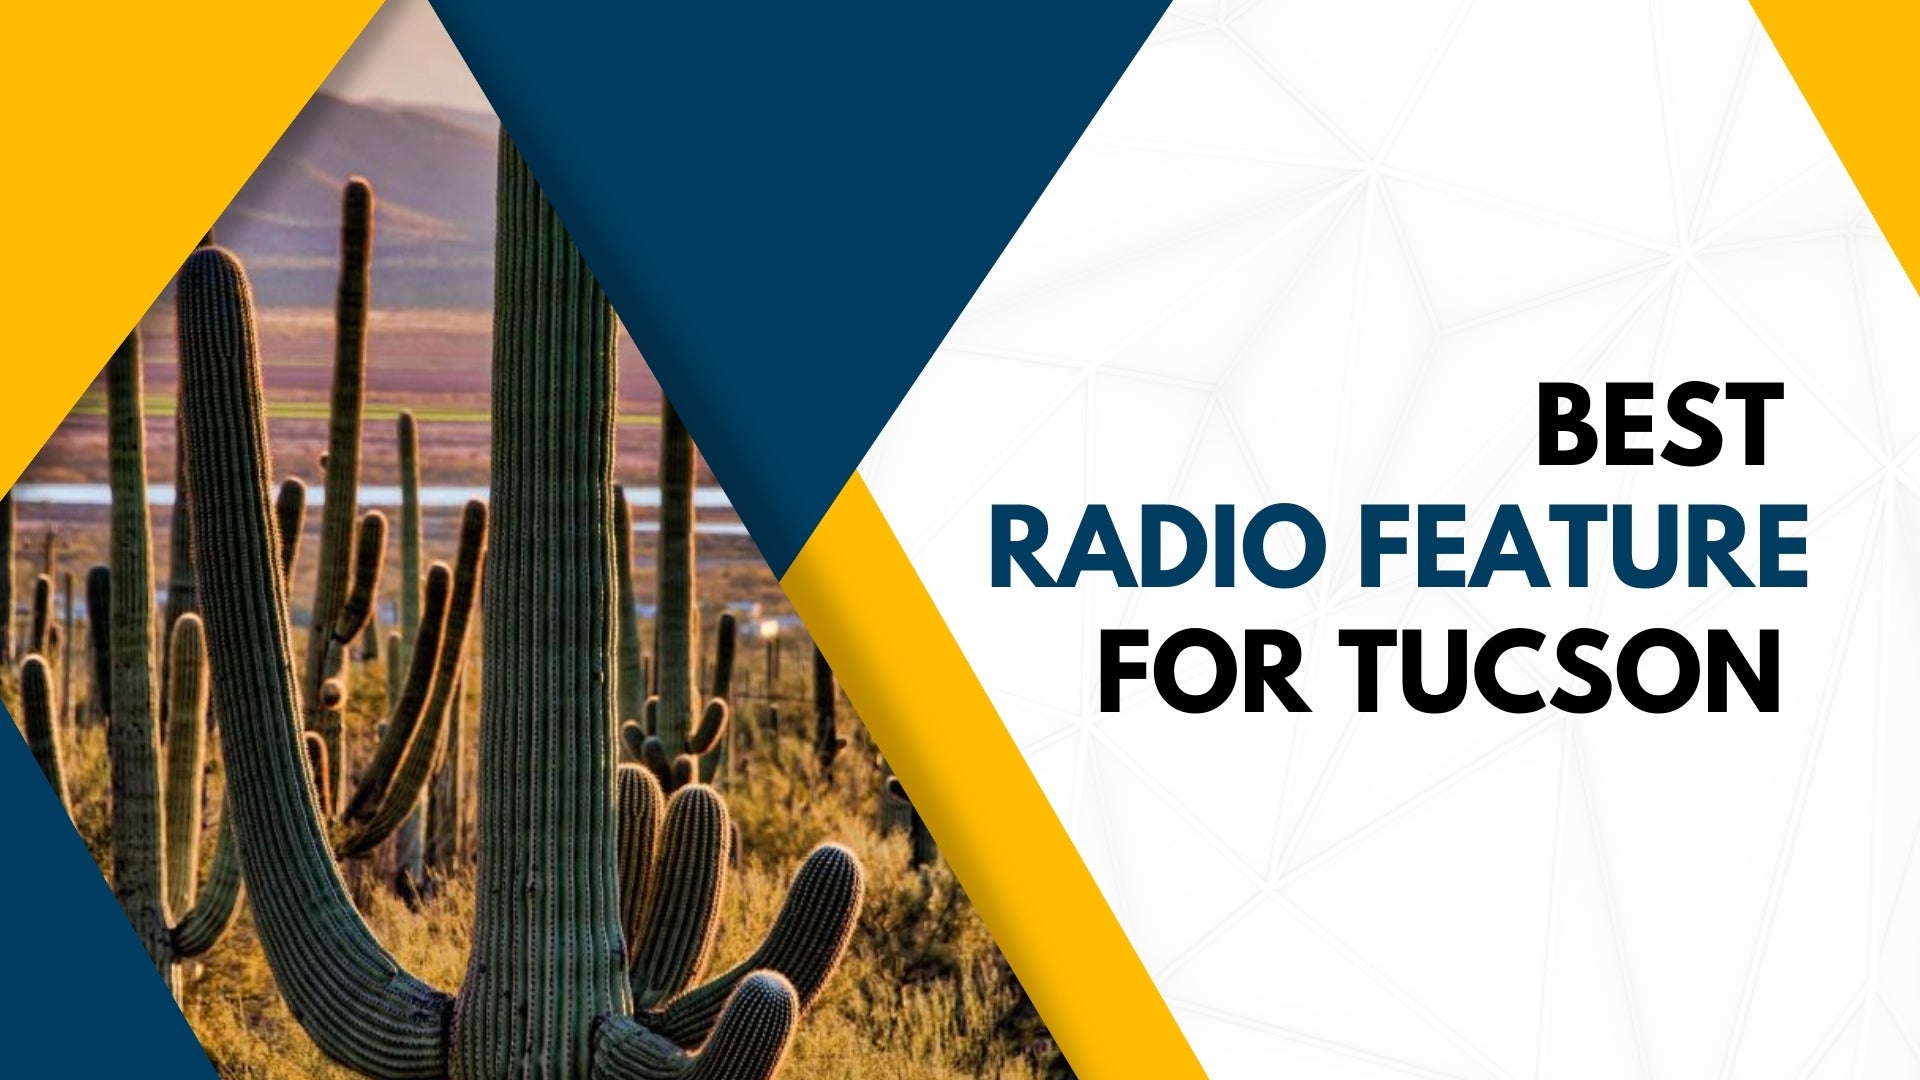 What's The Best Radio Feature For Tucson